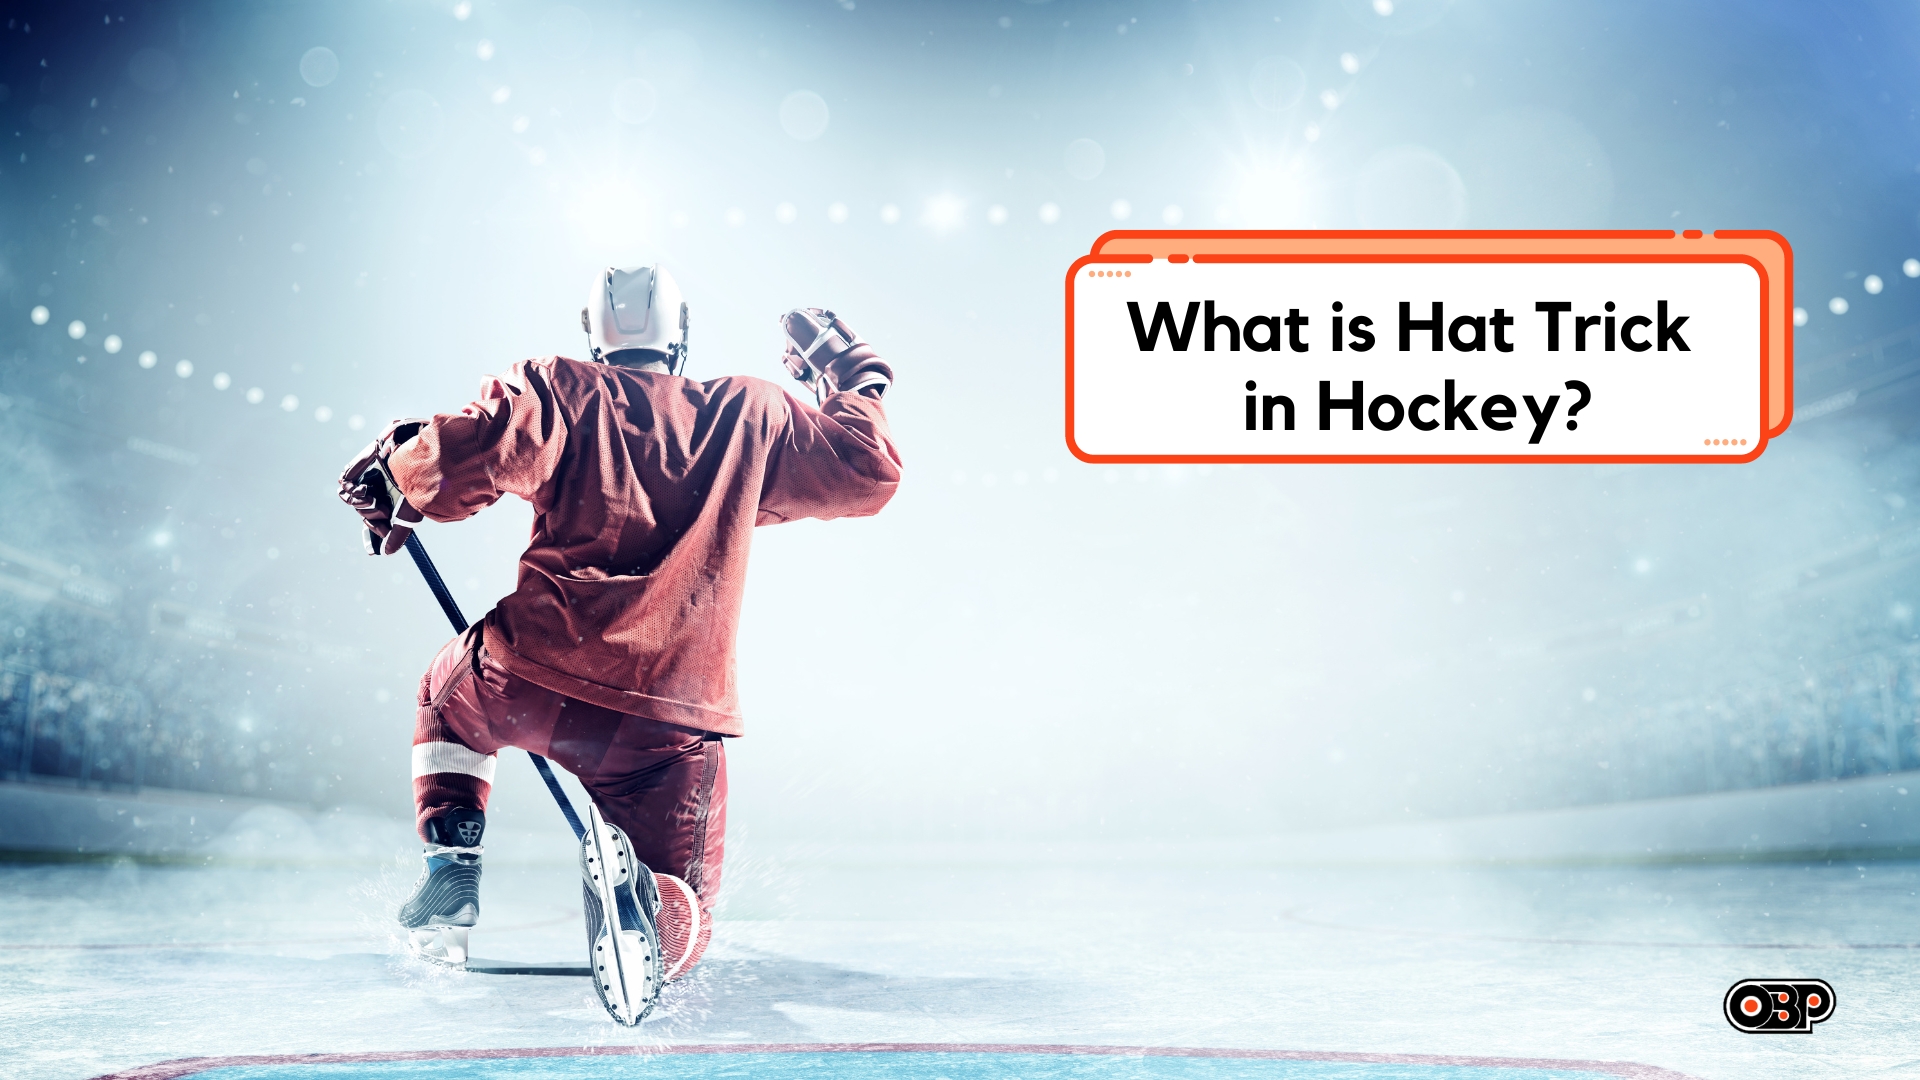 What is hat trick in hockey